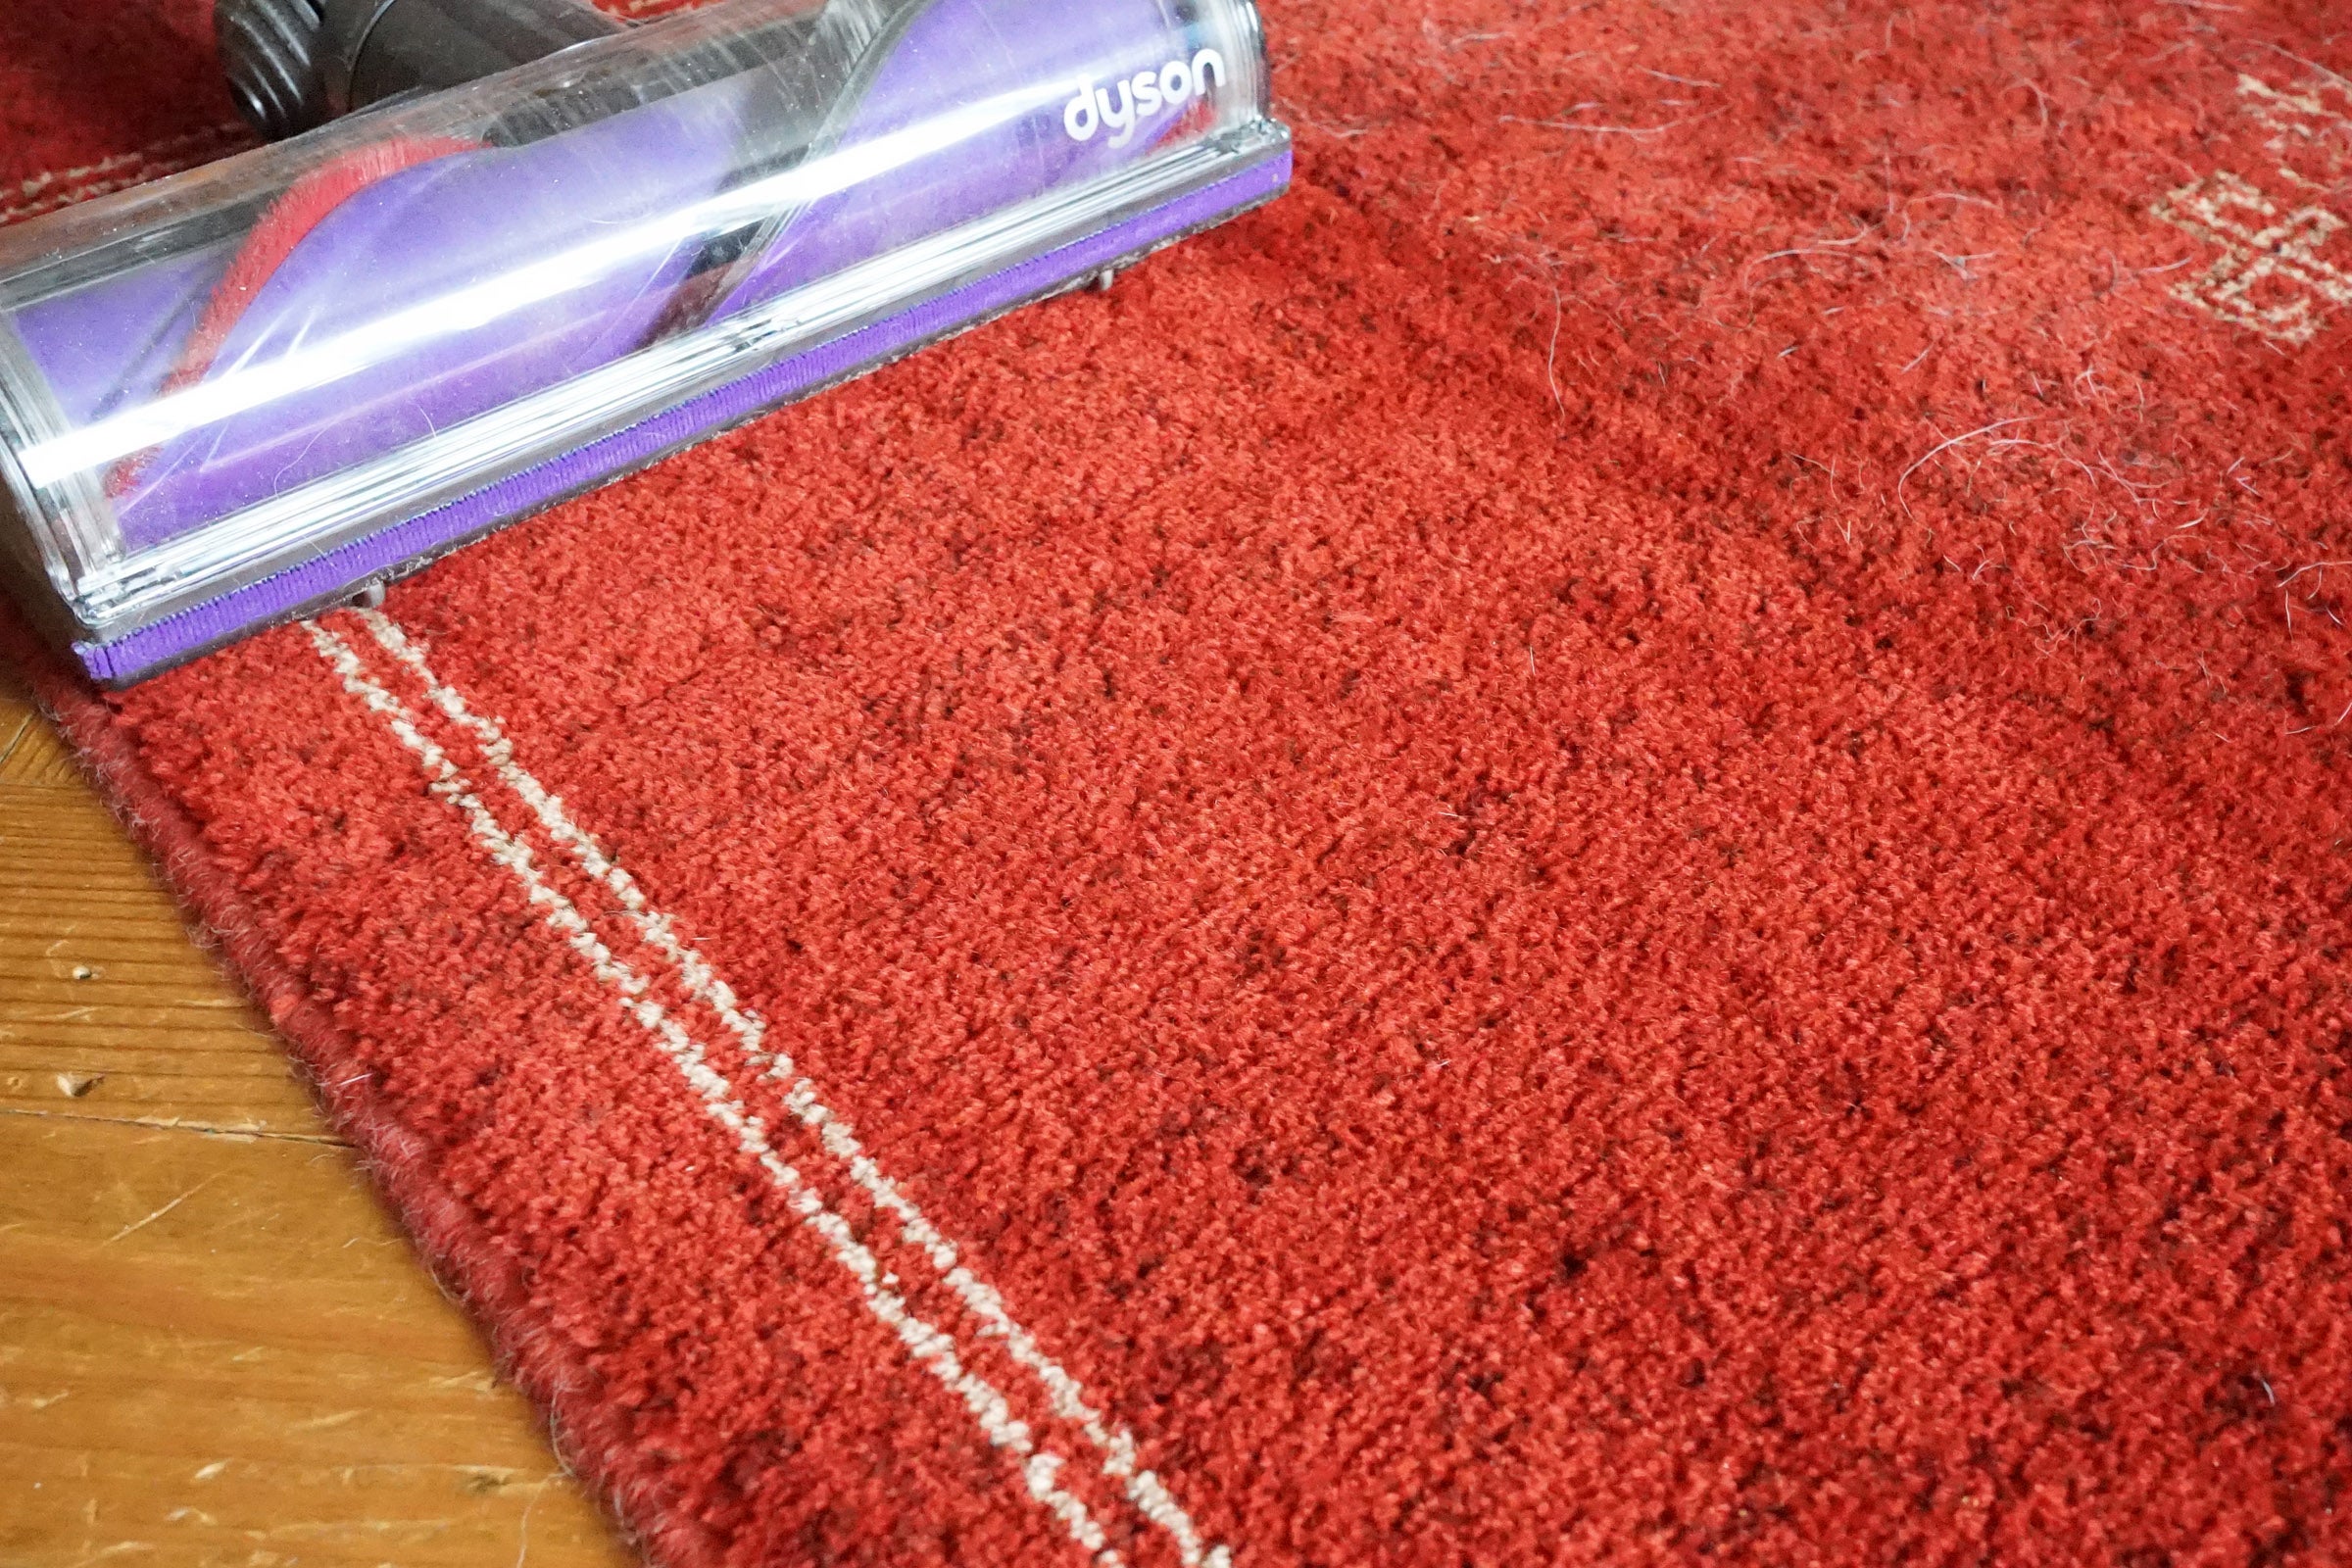 Dyson Cyclone V10 vacuum cleaning a red carpet.